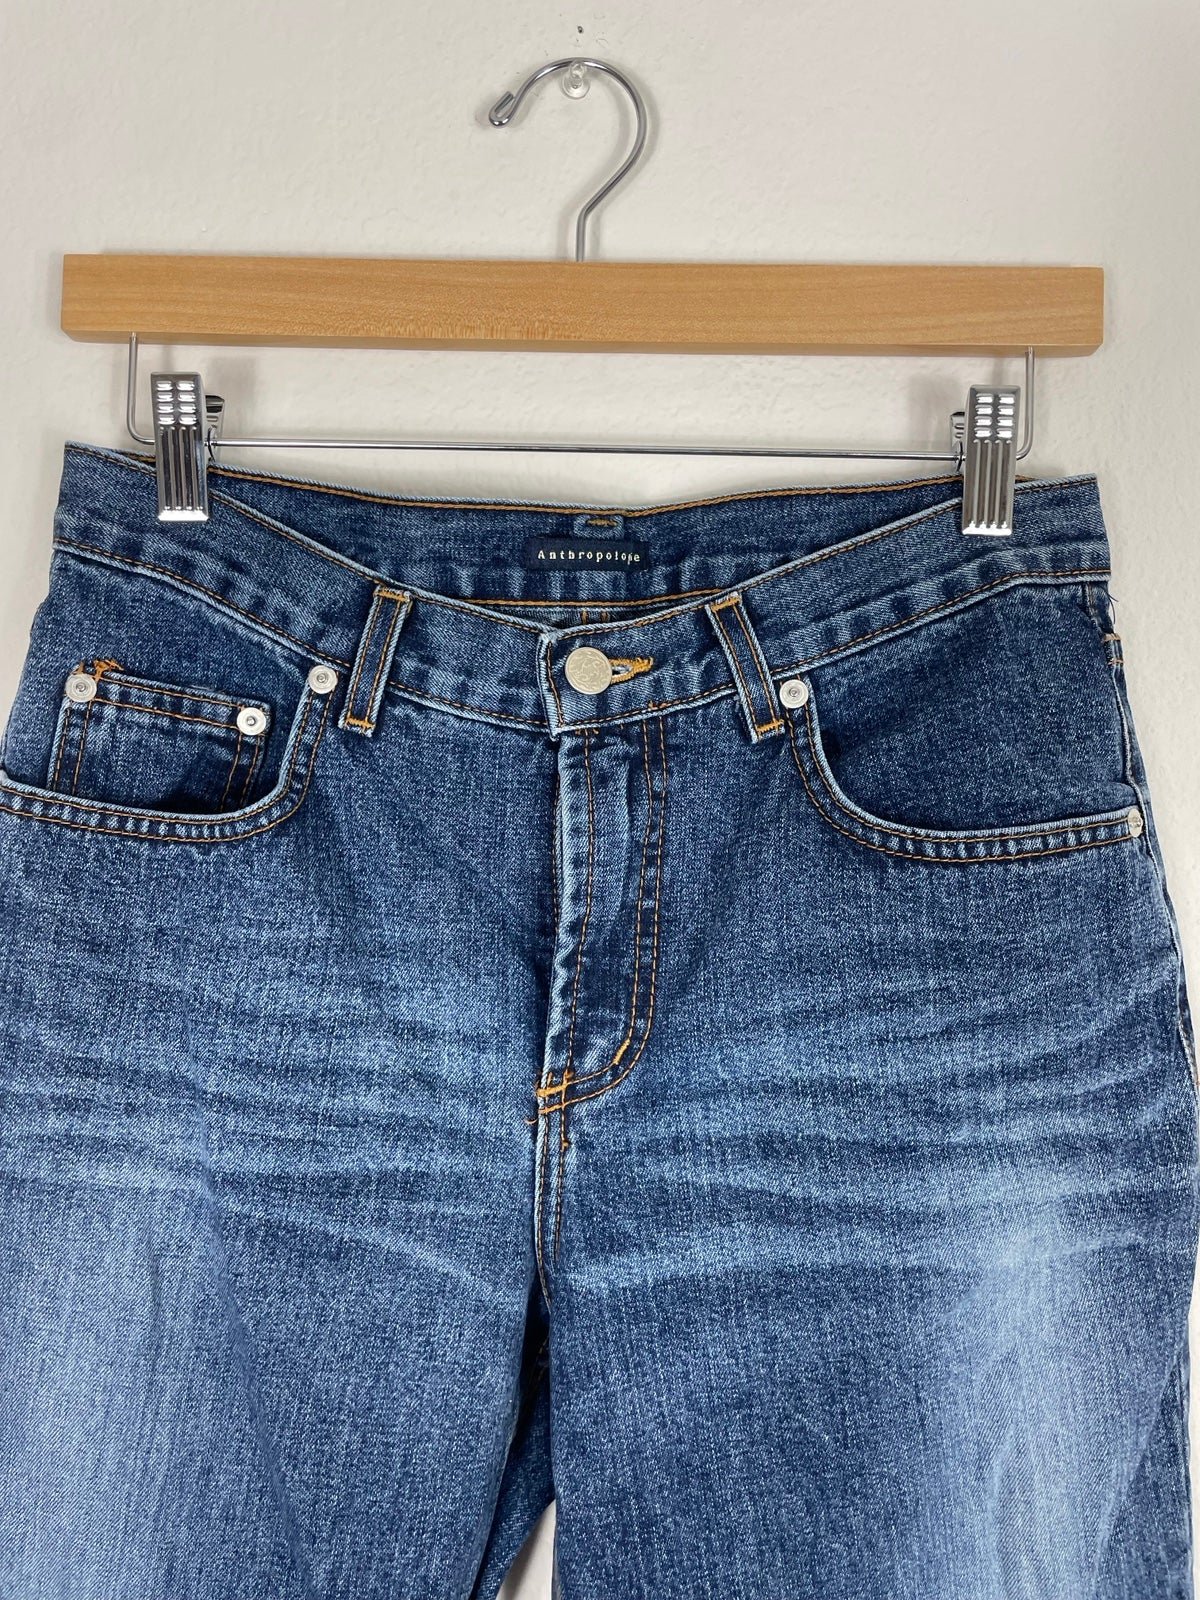 Personality Anthropologie Mid-Rise Straight Jeans Size 28 iYVRqlLzR US Outlet